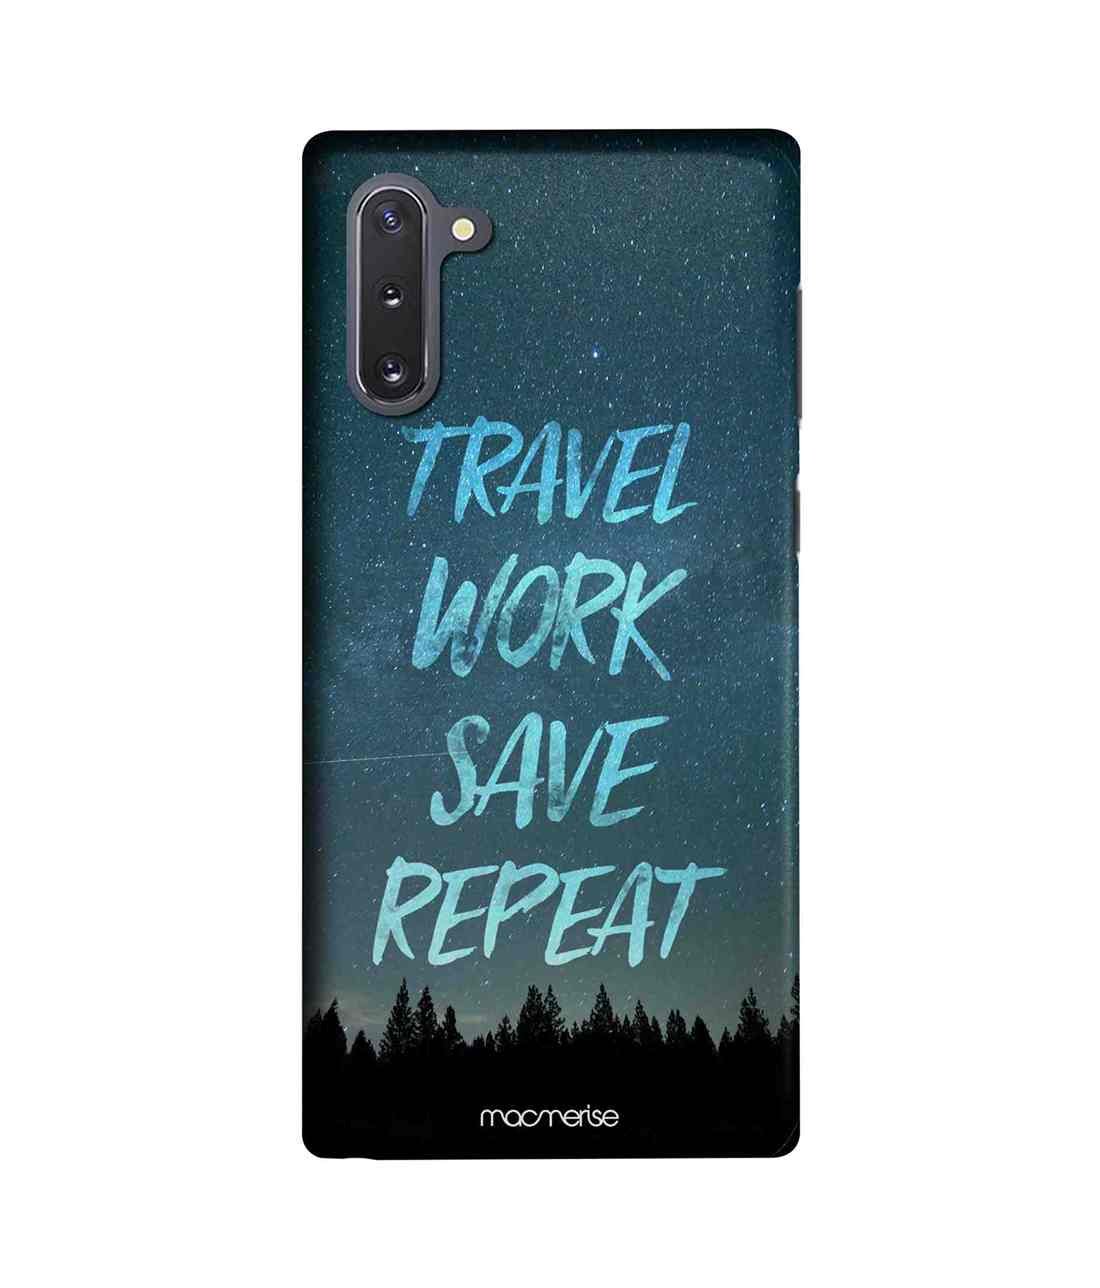 Buy Travel Work Save Repeat - Sleek Phone Case for Samsung Note10 Online